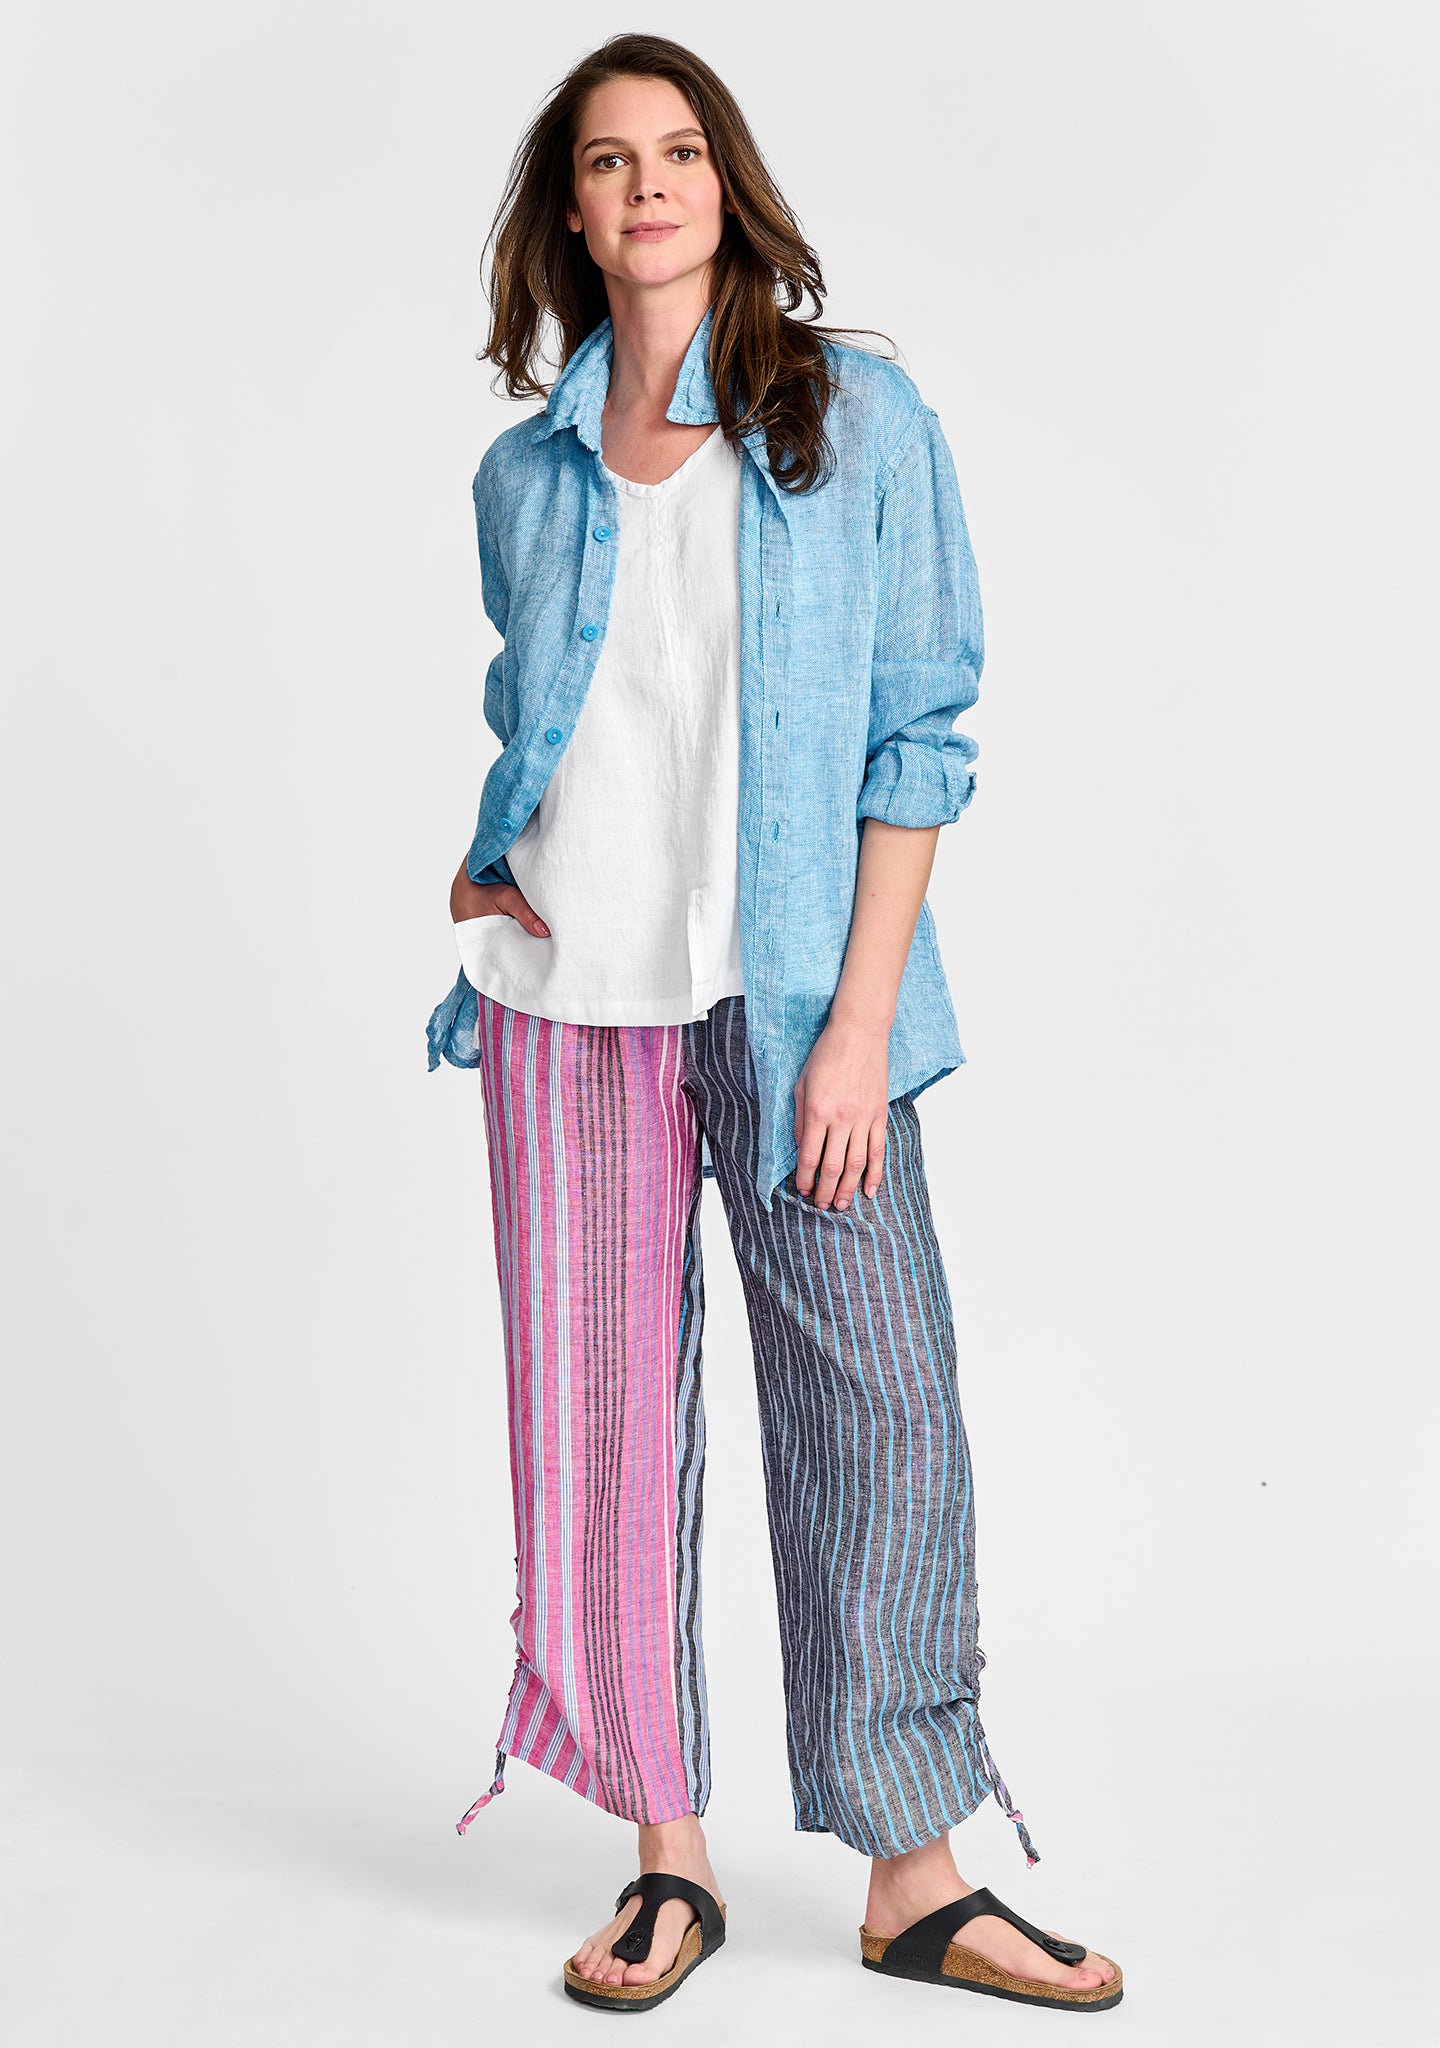 FLAX linen shirt in blue with linen tank in white and linen pants in stripe